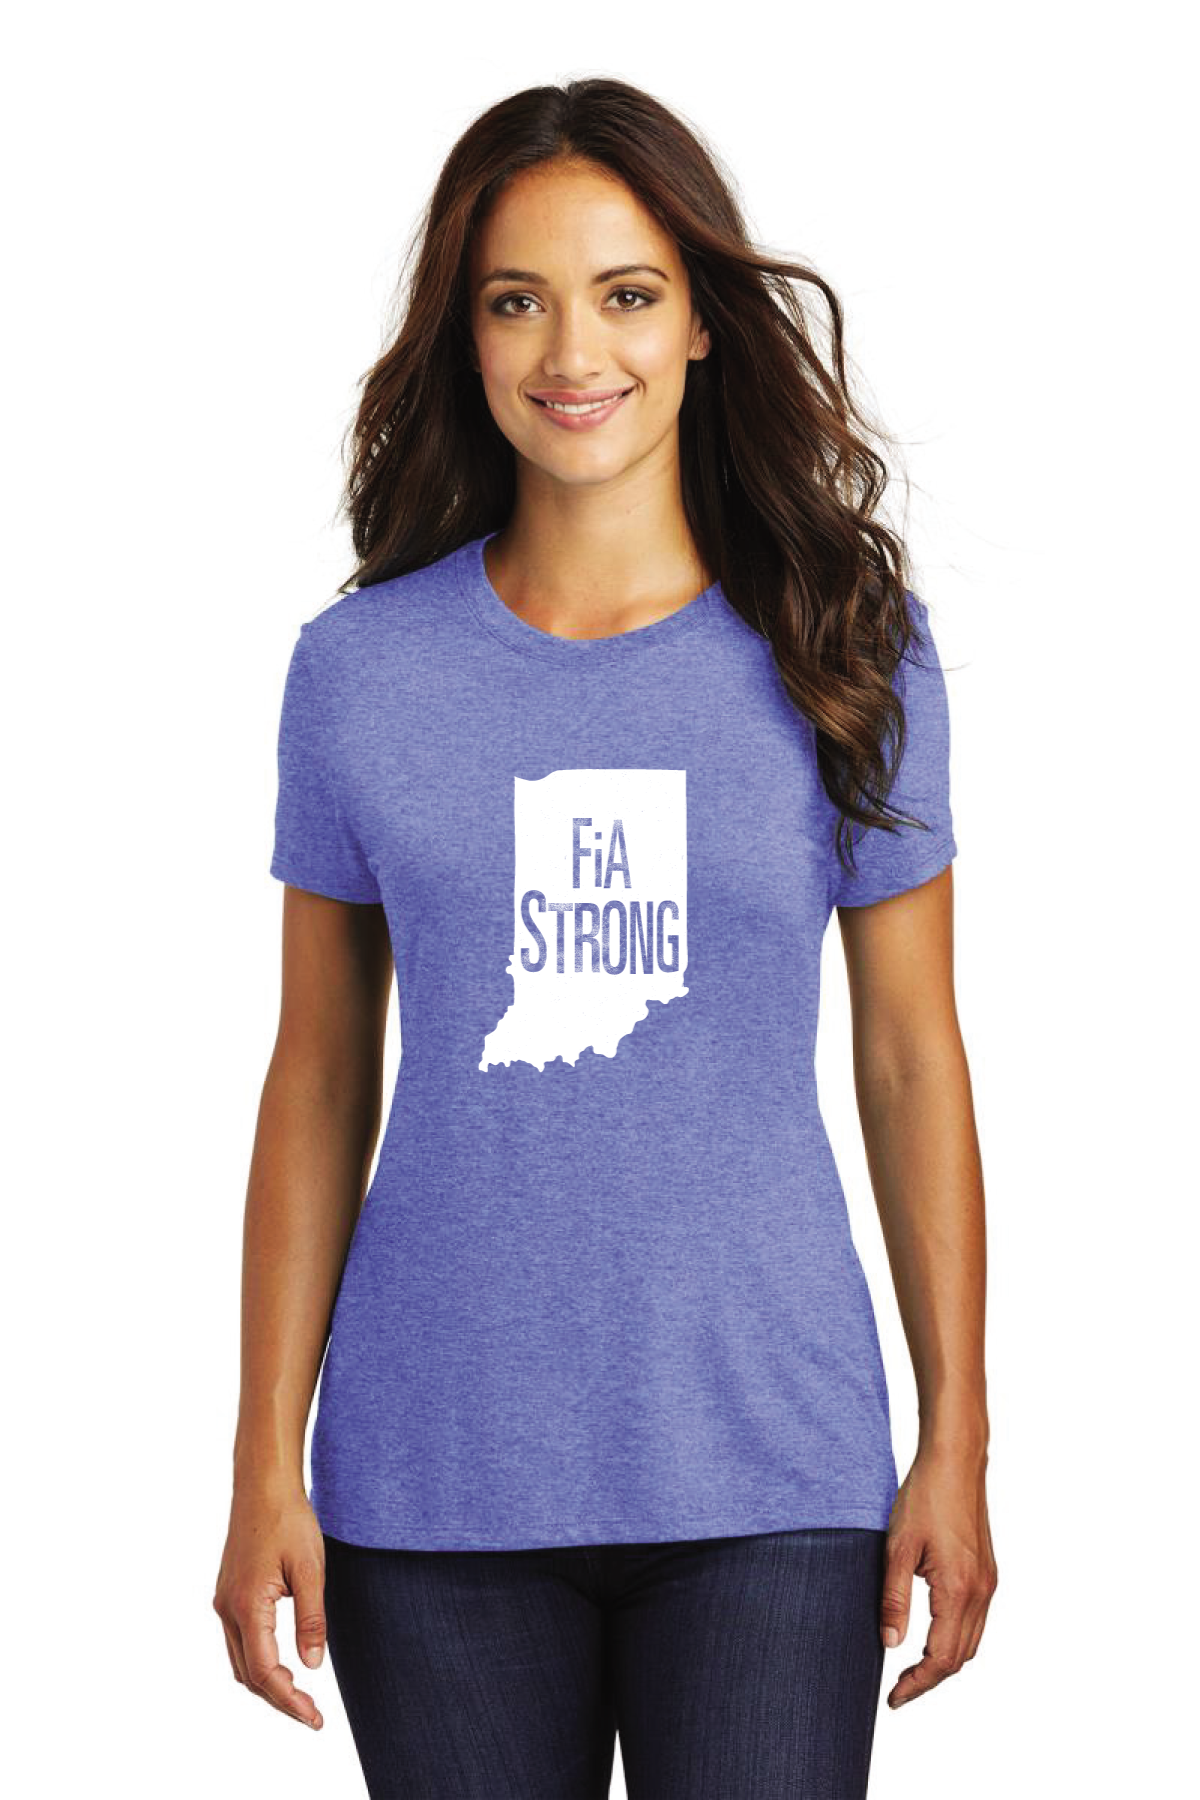 FiA Strong Indiana Pre-Order October 2021